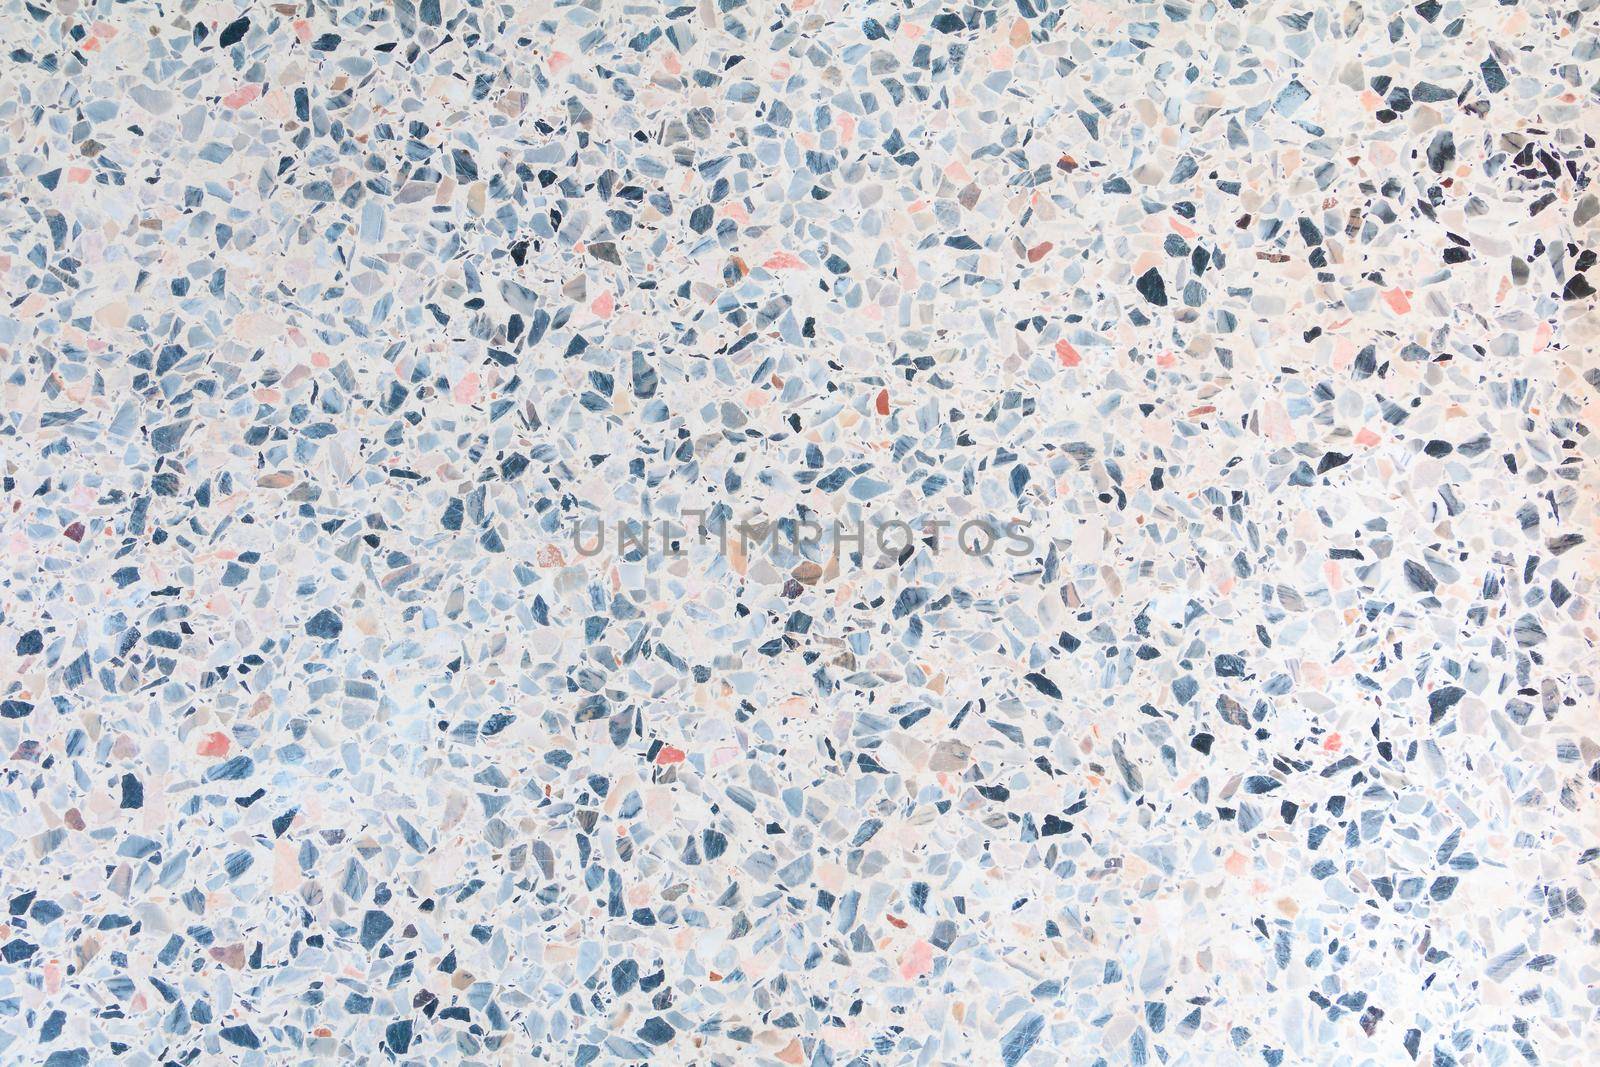 terrazzo flooring old texture or polished stone for background pattern and color beautiful